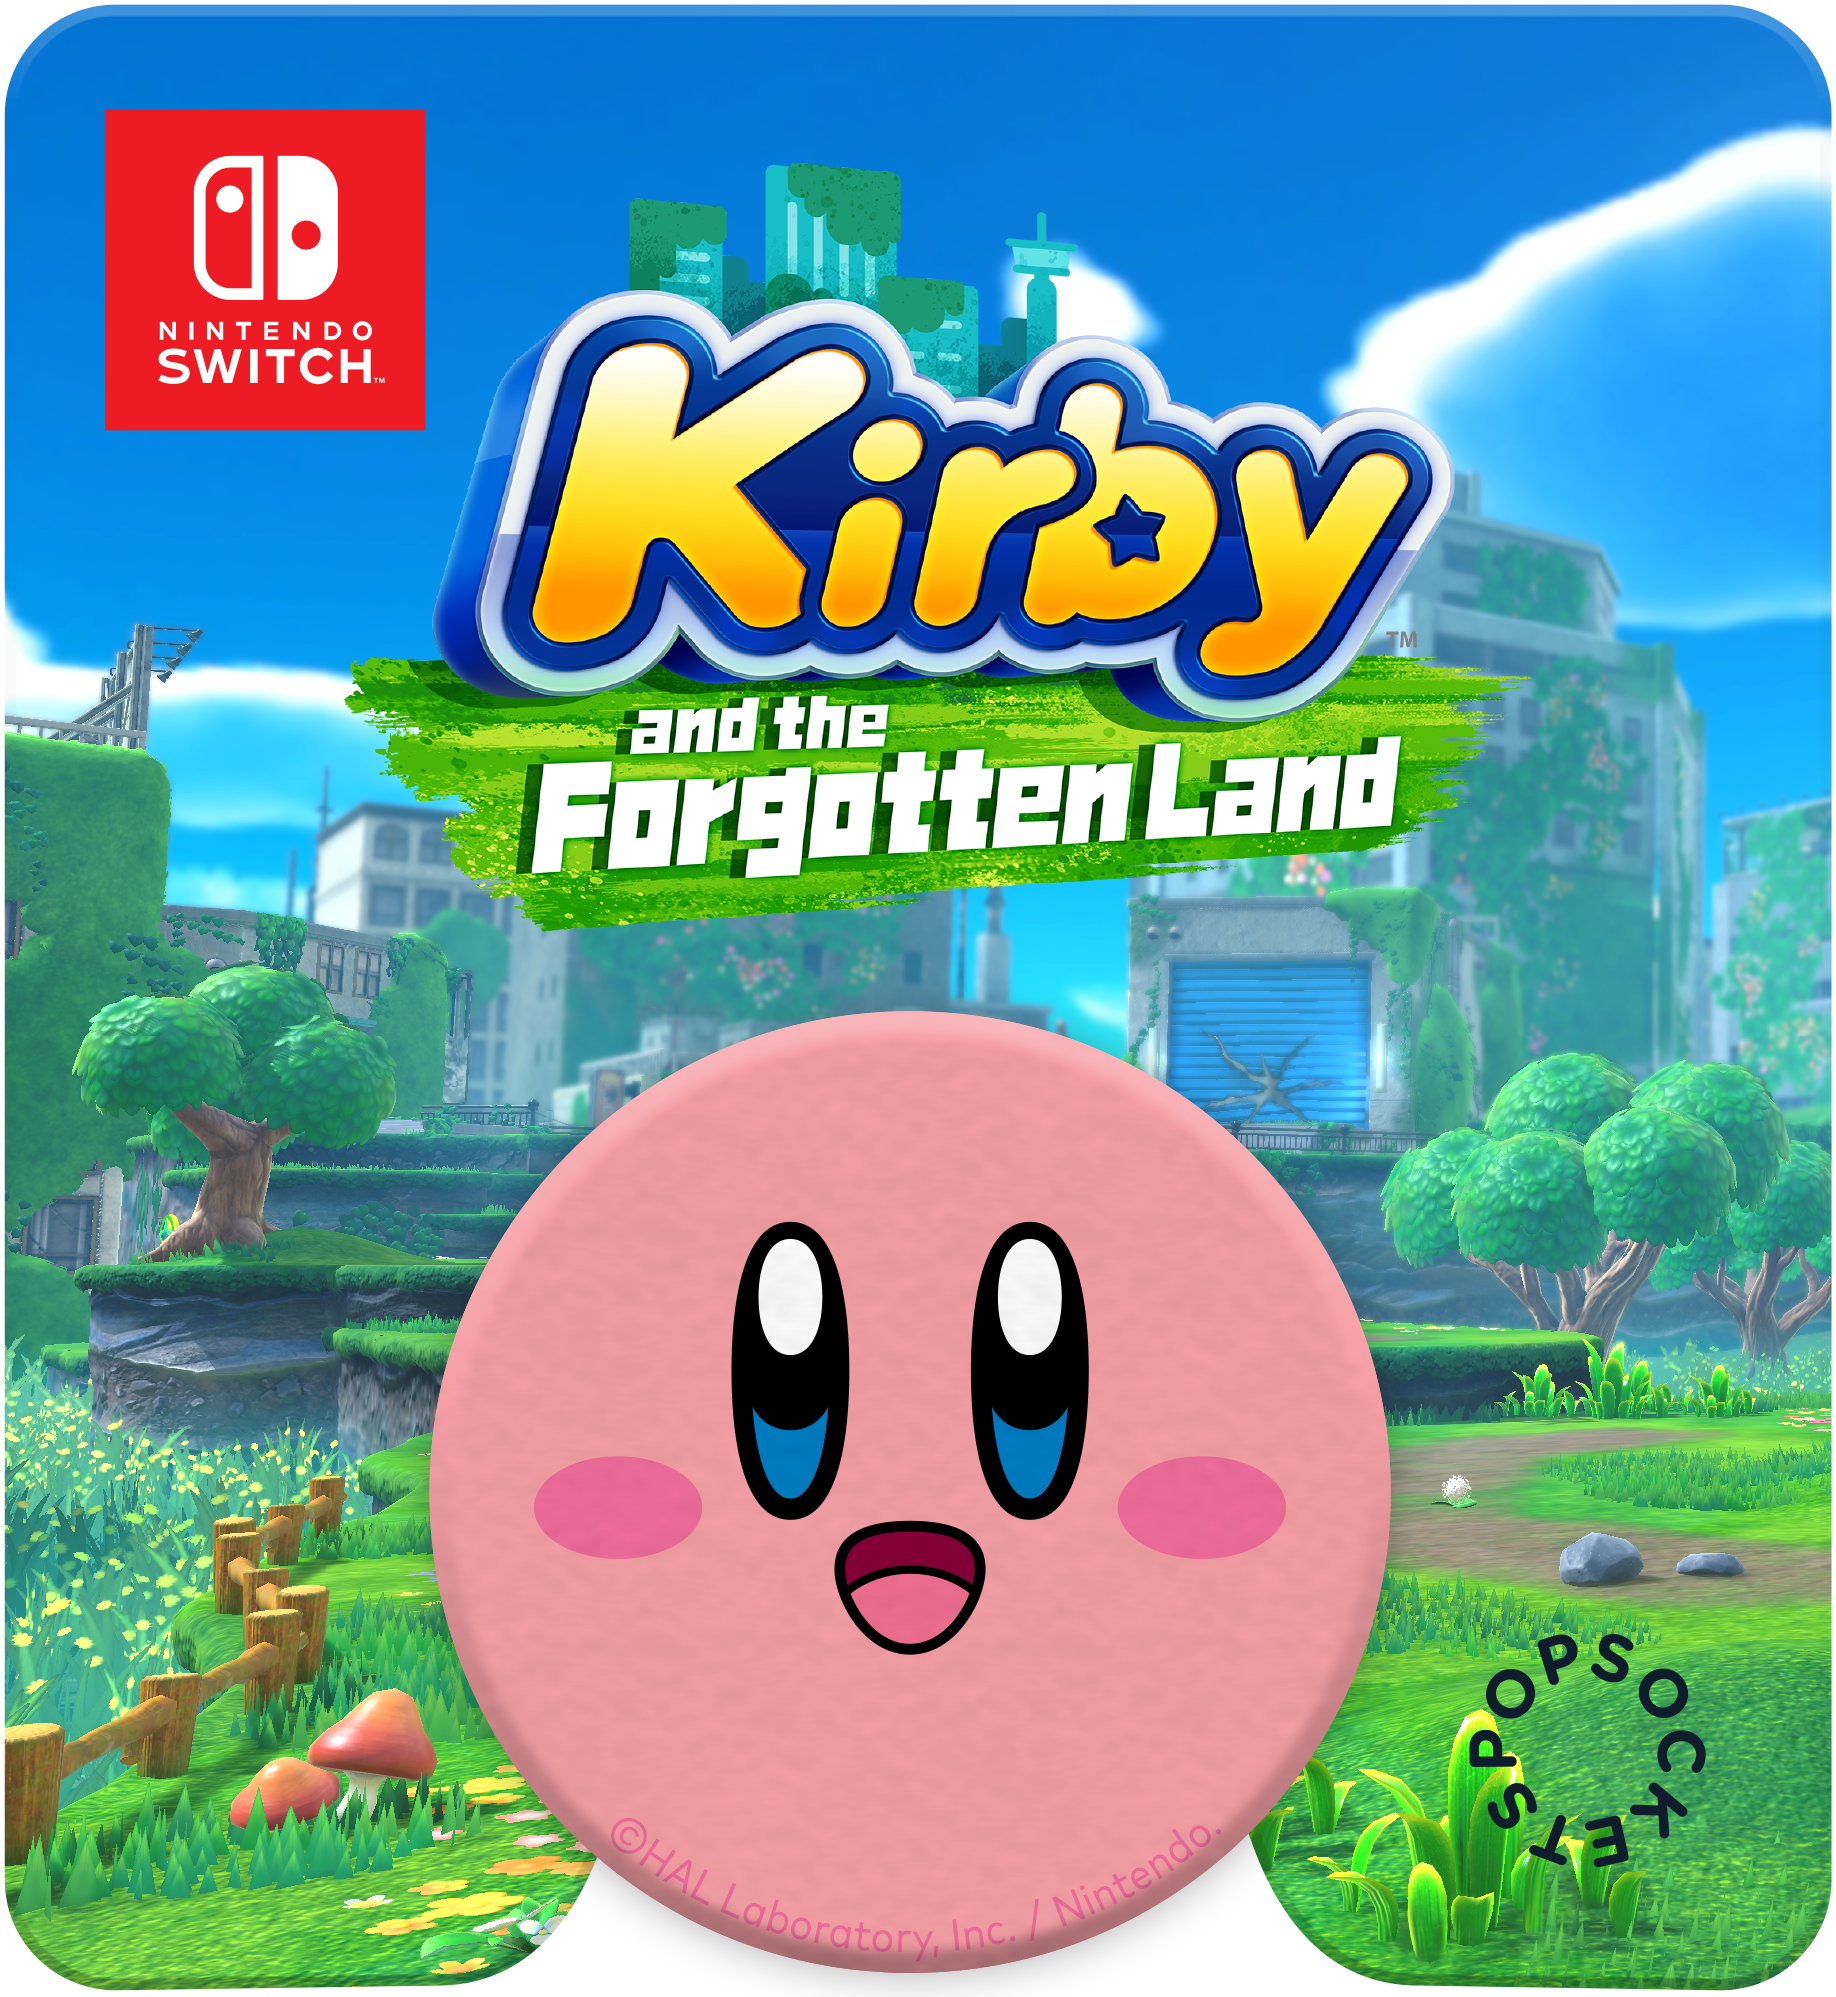 Kirby and the Forgotten Land with Pre-Order Bonus Kirby Popsocket - Nintendo Switch - image 5 of 13